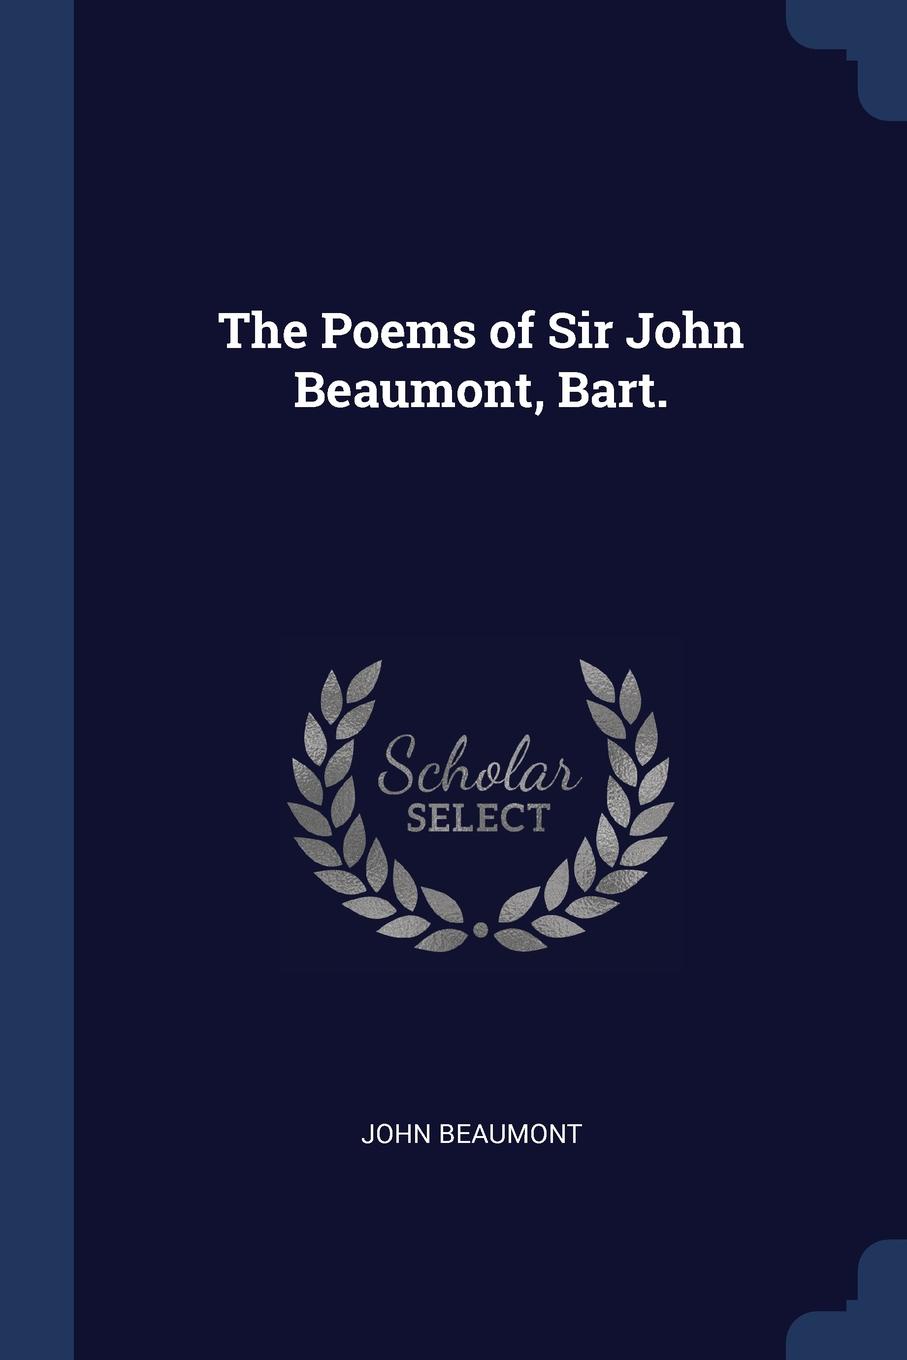 The Poems of Sir John Beaumont, Bart.